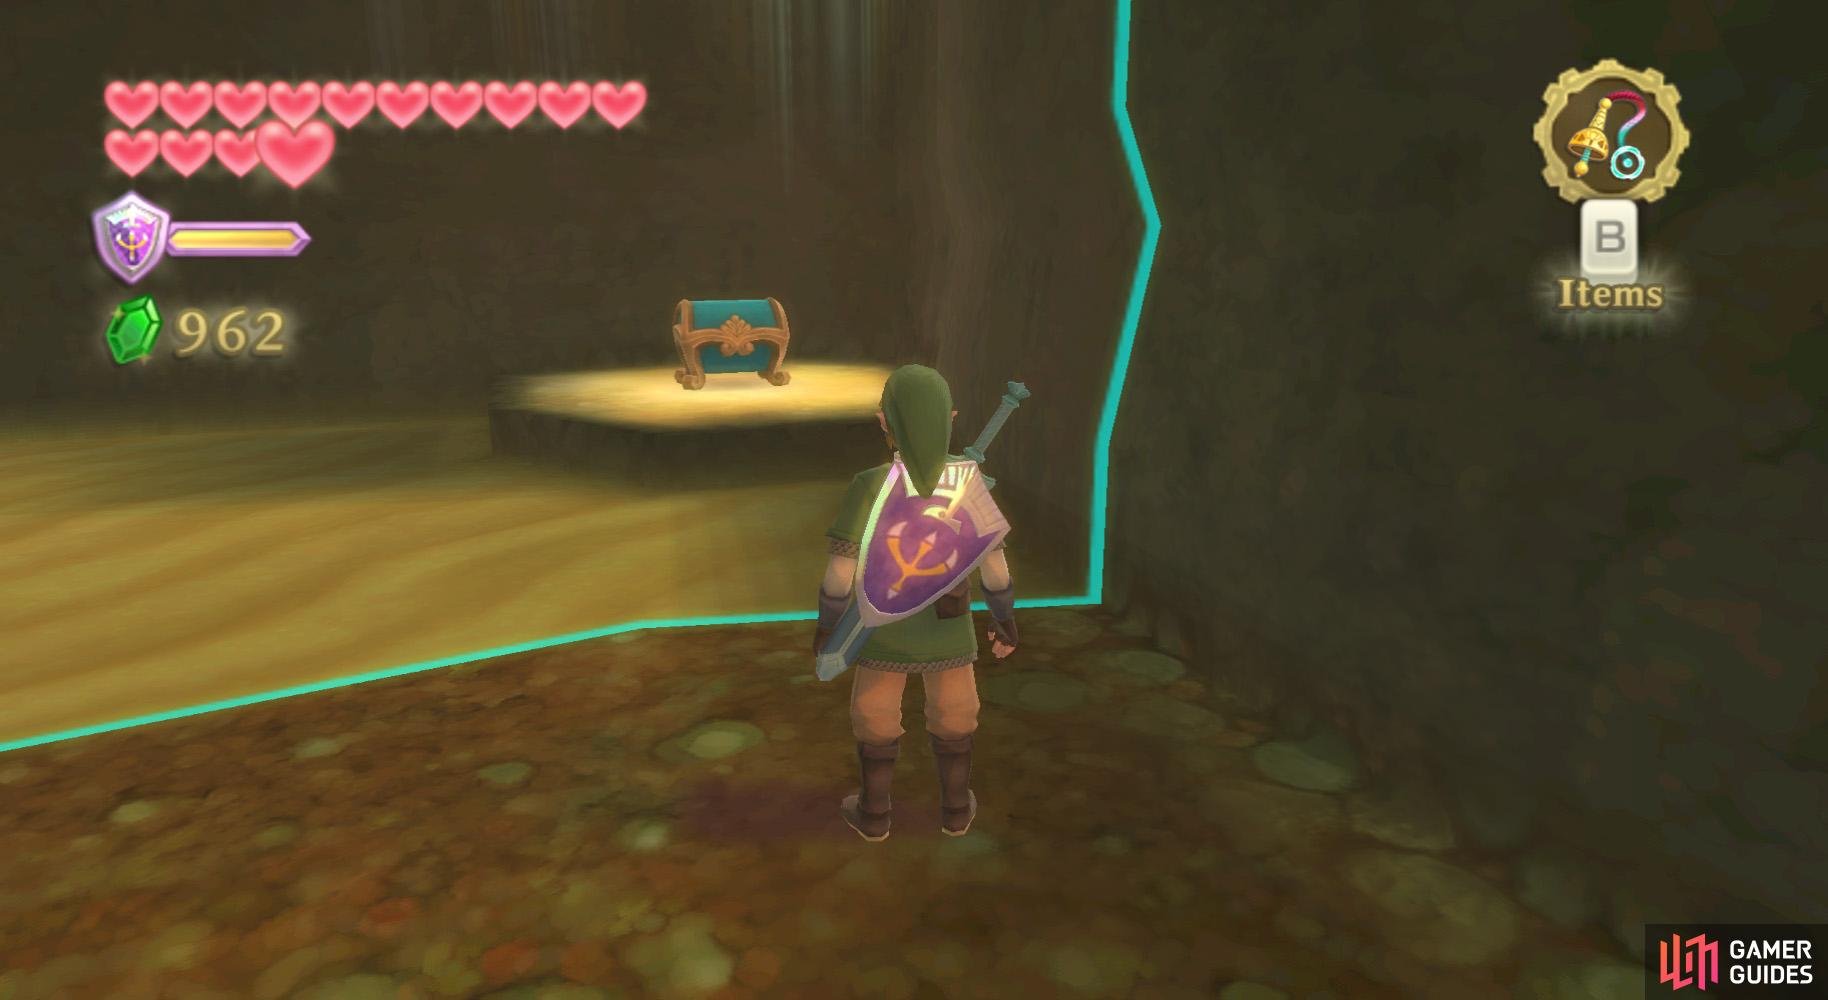 Put down the orb far away from the chest, so the platforms dont rise, but close enough so you can run across.